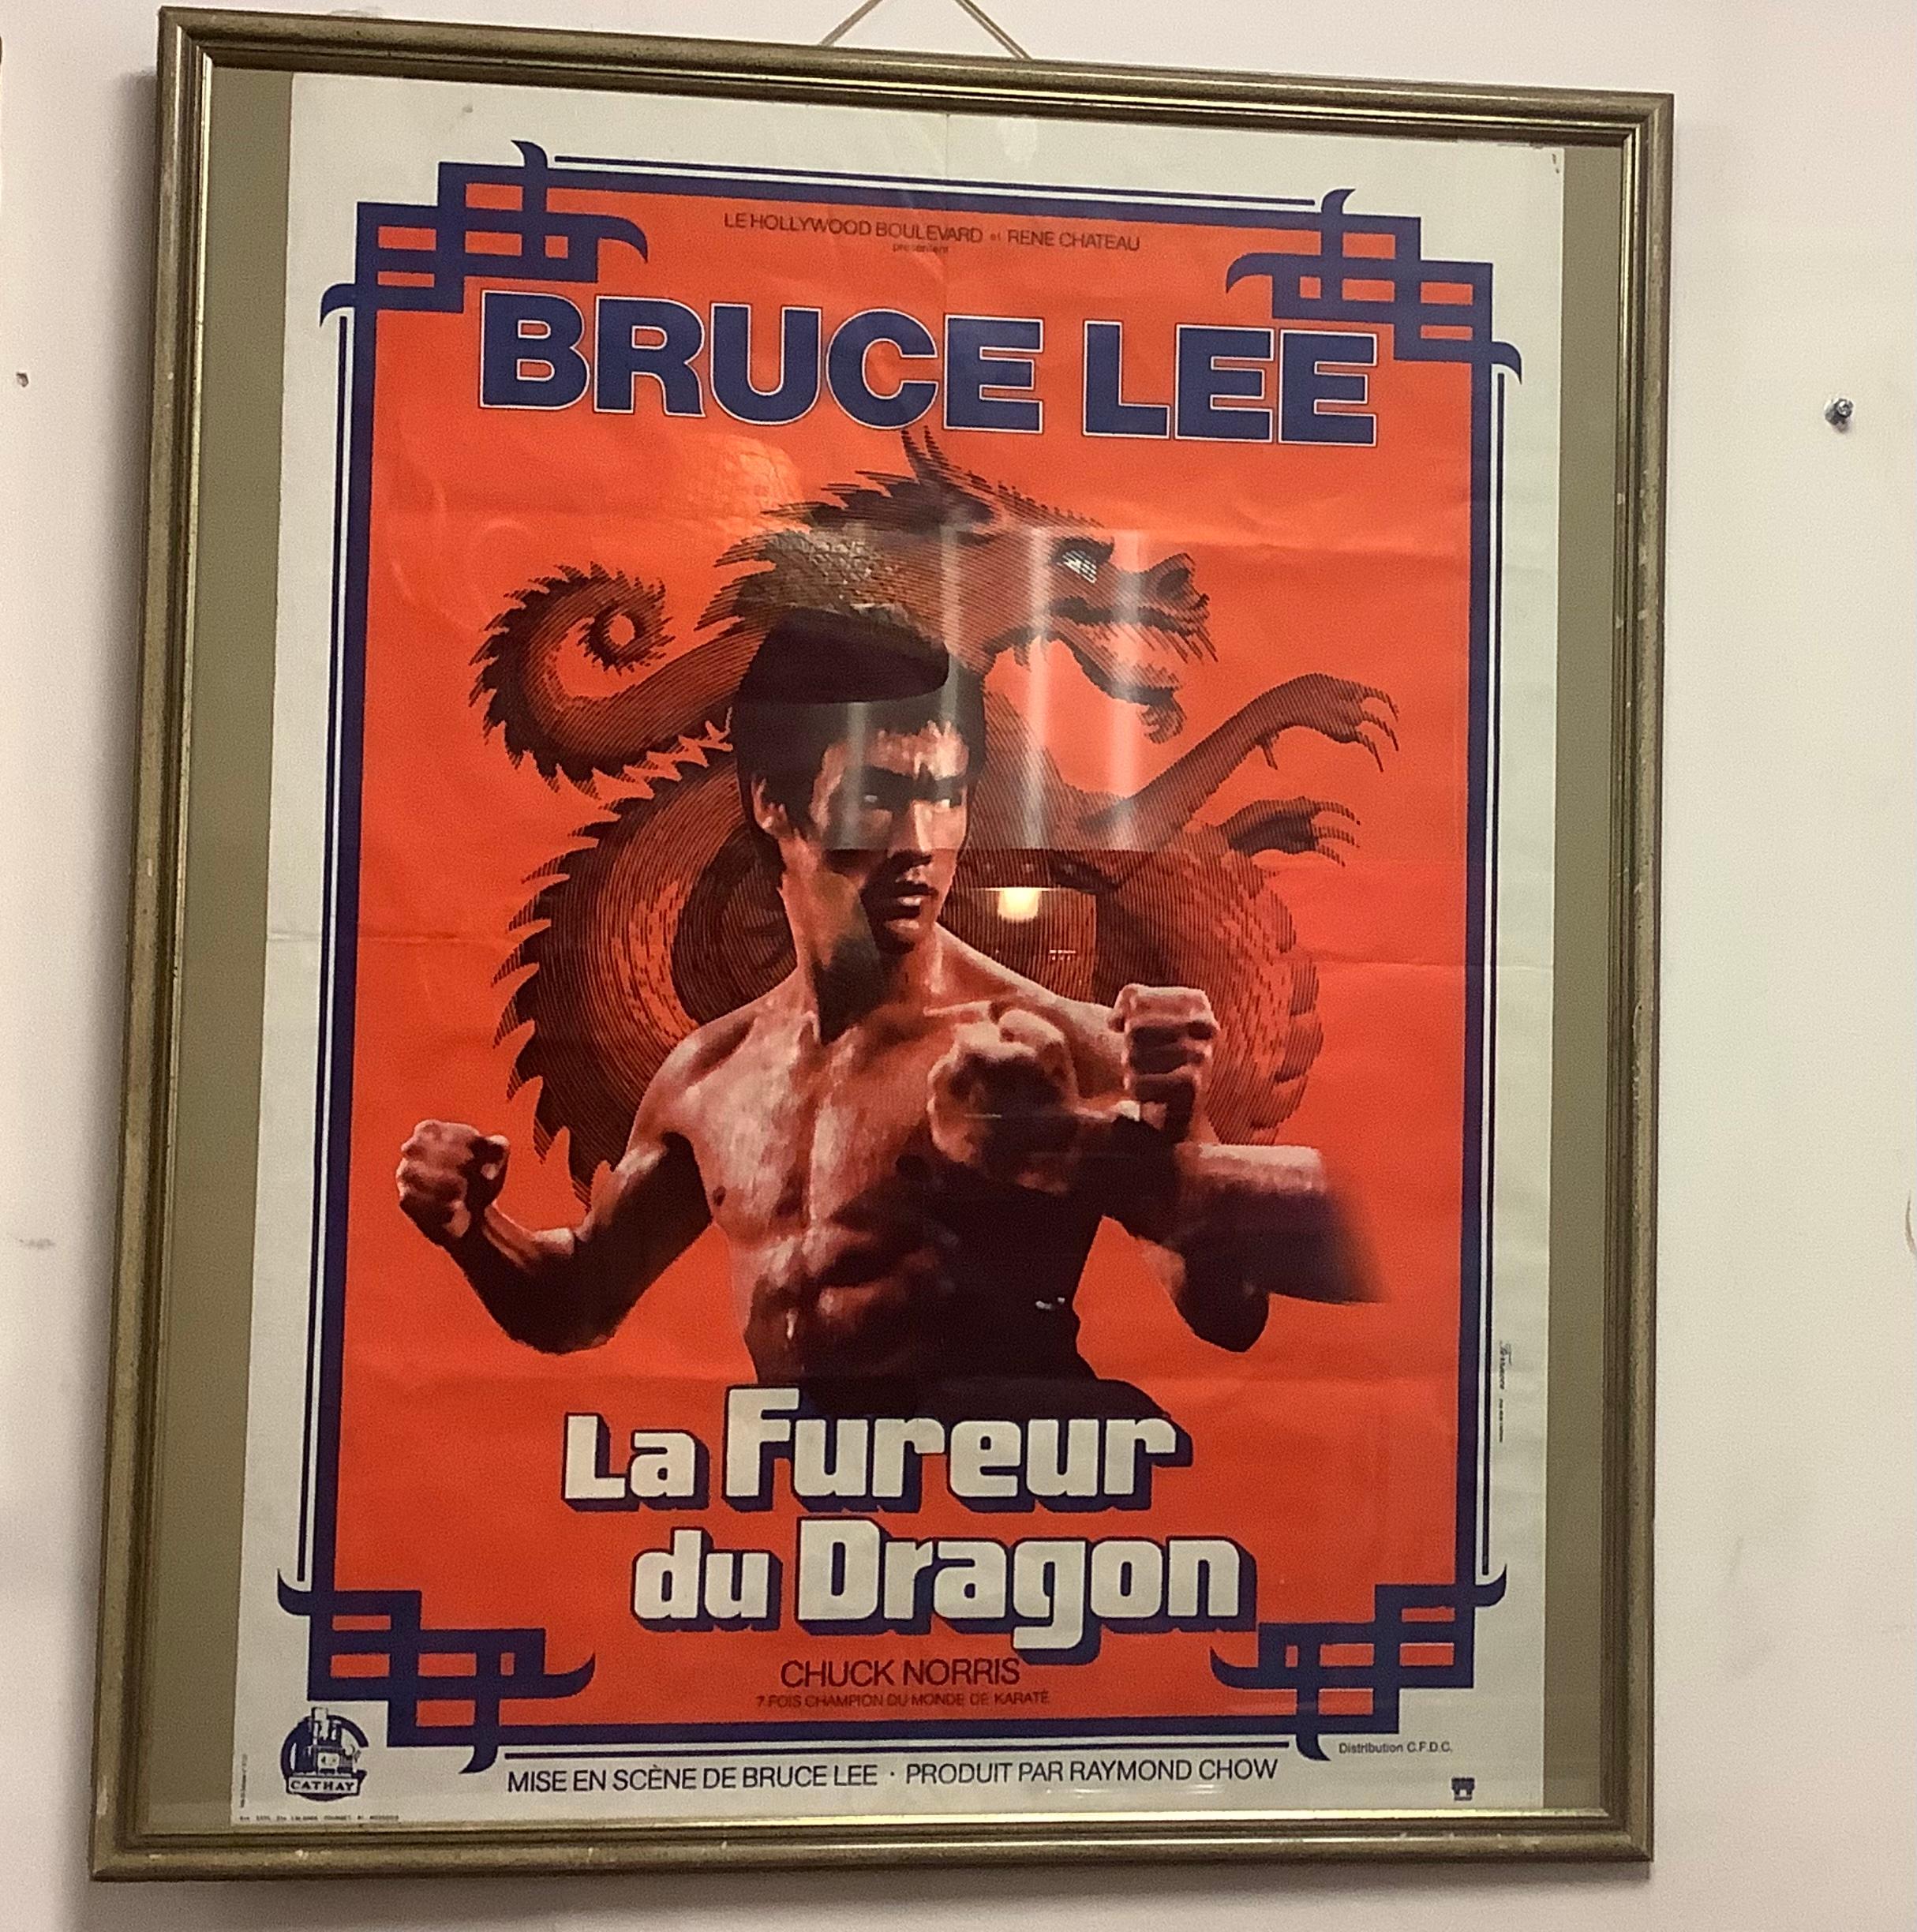 I love this poster totally iconic superb condition.
French framed Bruce Lee in his prime Way of the Dragon.
One for the collector all original 1972.